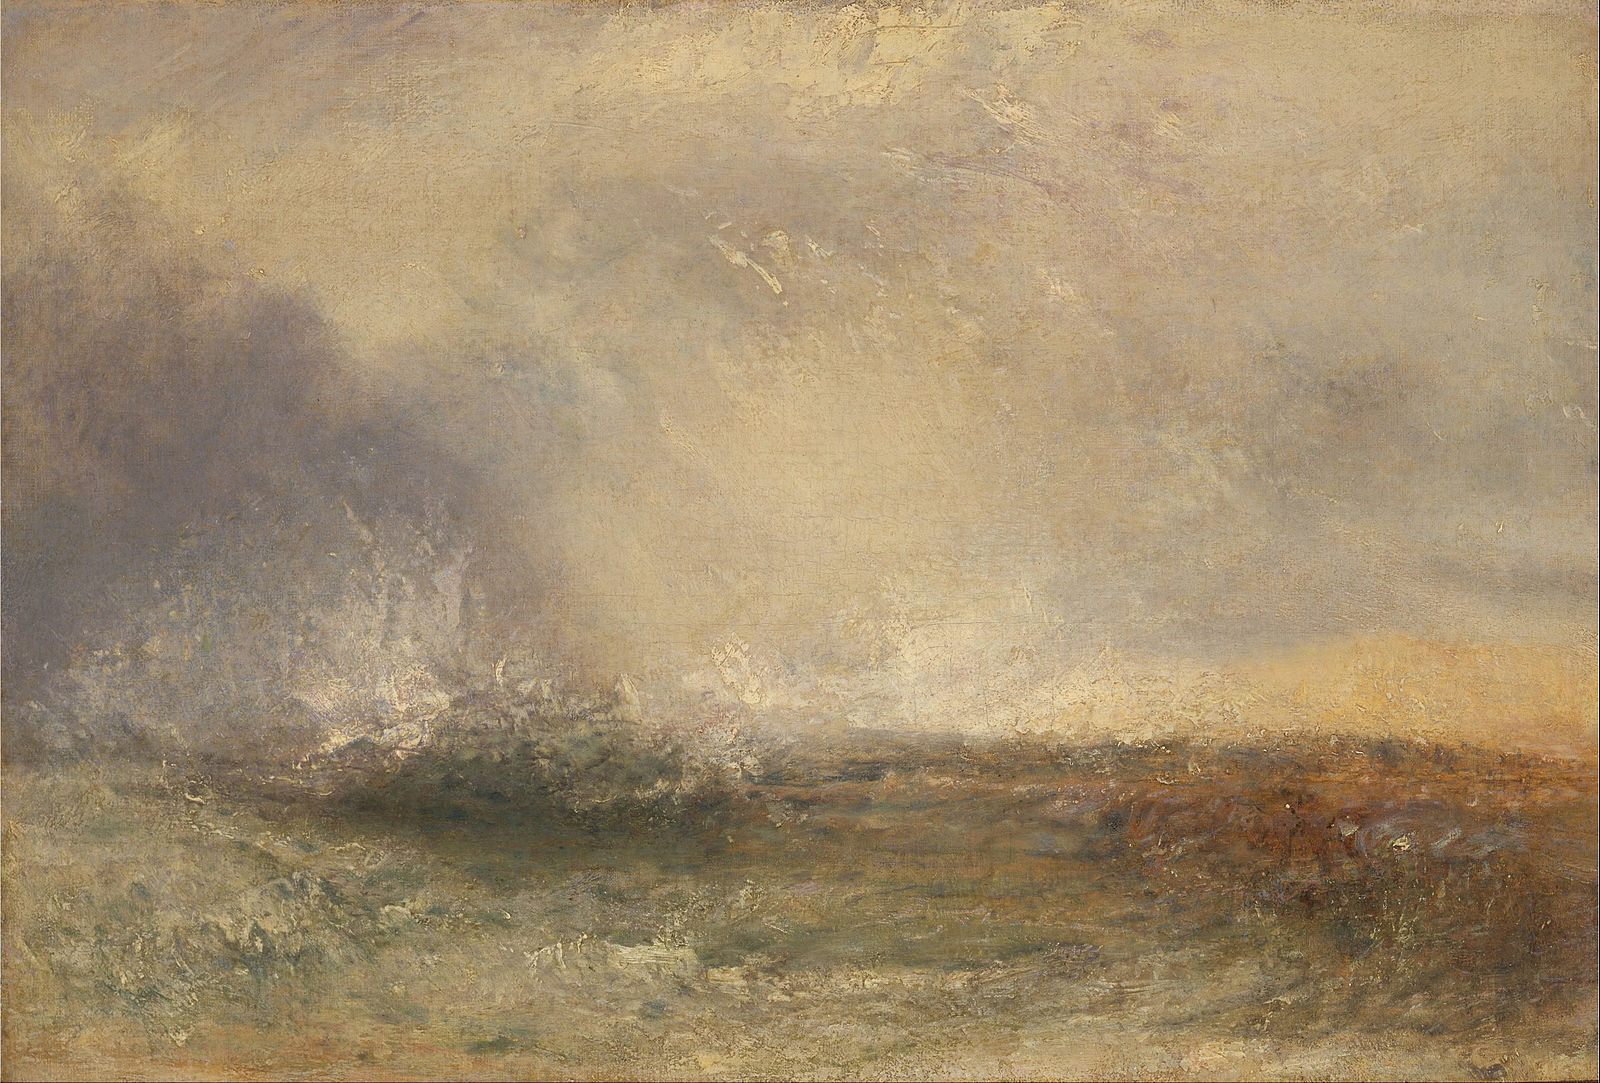 Stormy Sea Breaking on a Shore by Joseph Mallord William Turner